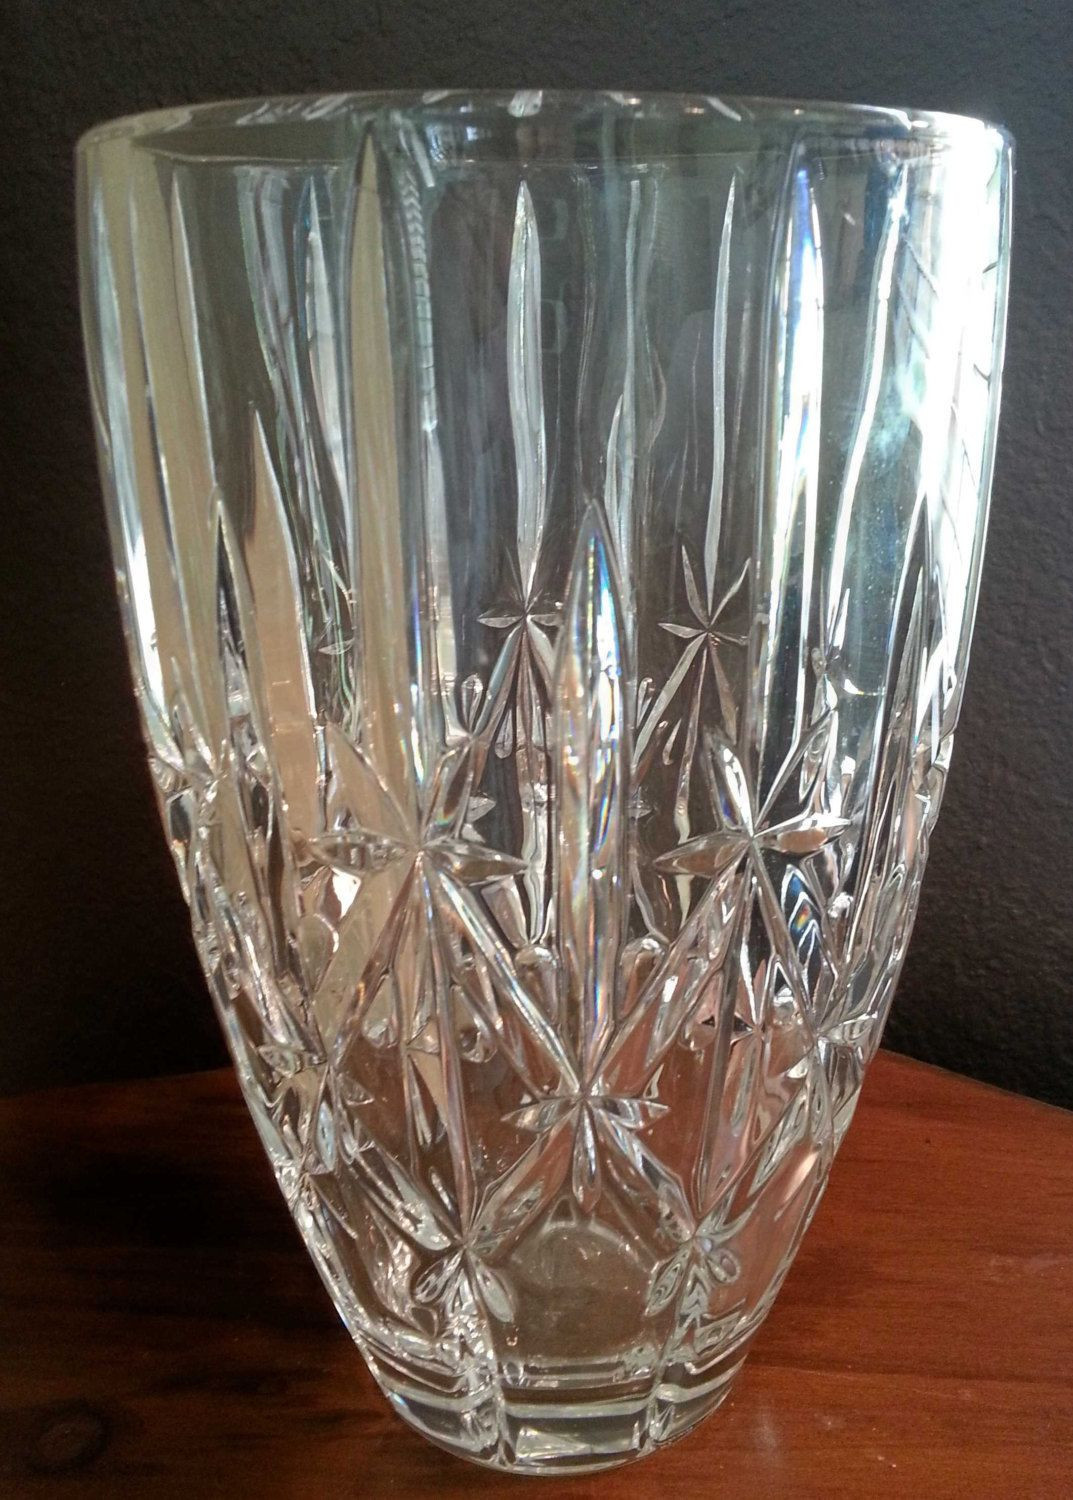 16 Unique Waterford Crystal Vase Price 2024 free download waterford crystal vase price of waterford crystal vases pics marquis by waterford sparkle 9 inch pertaining to waterford crystal vases pics marquis by waterford sparkle 9 inch vase crystal v